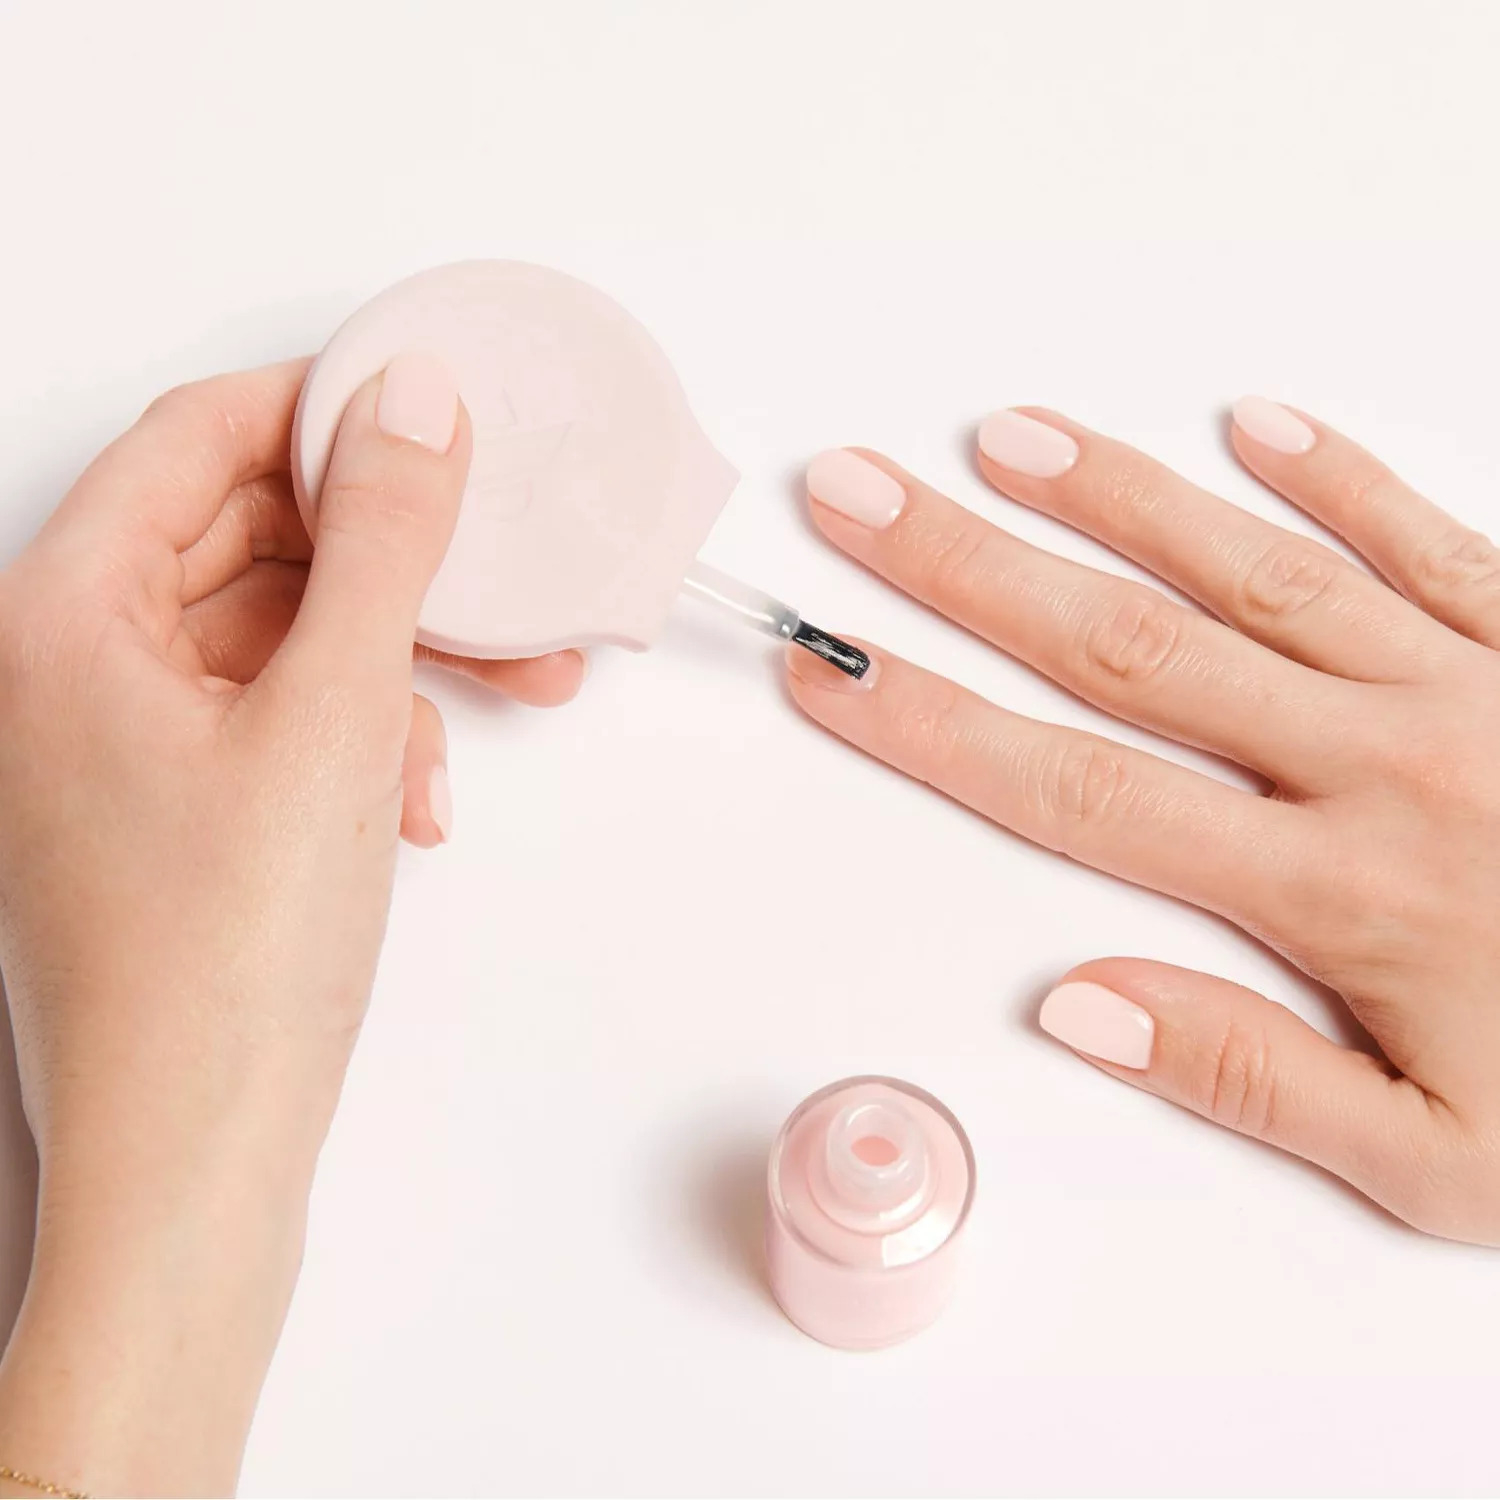 Hands applying nail polish with the round, flat handle attached to the brush